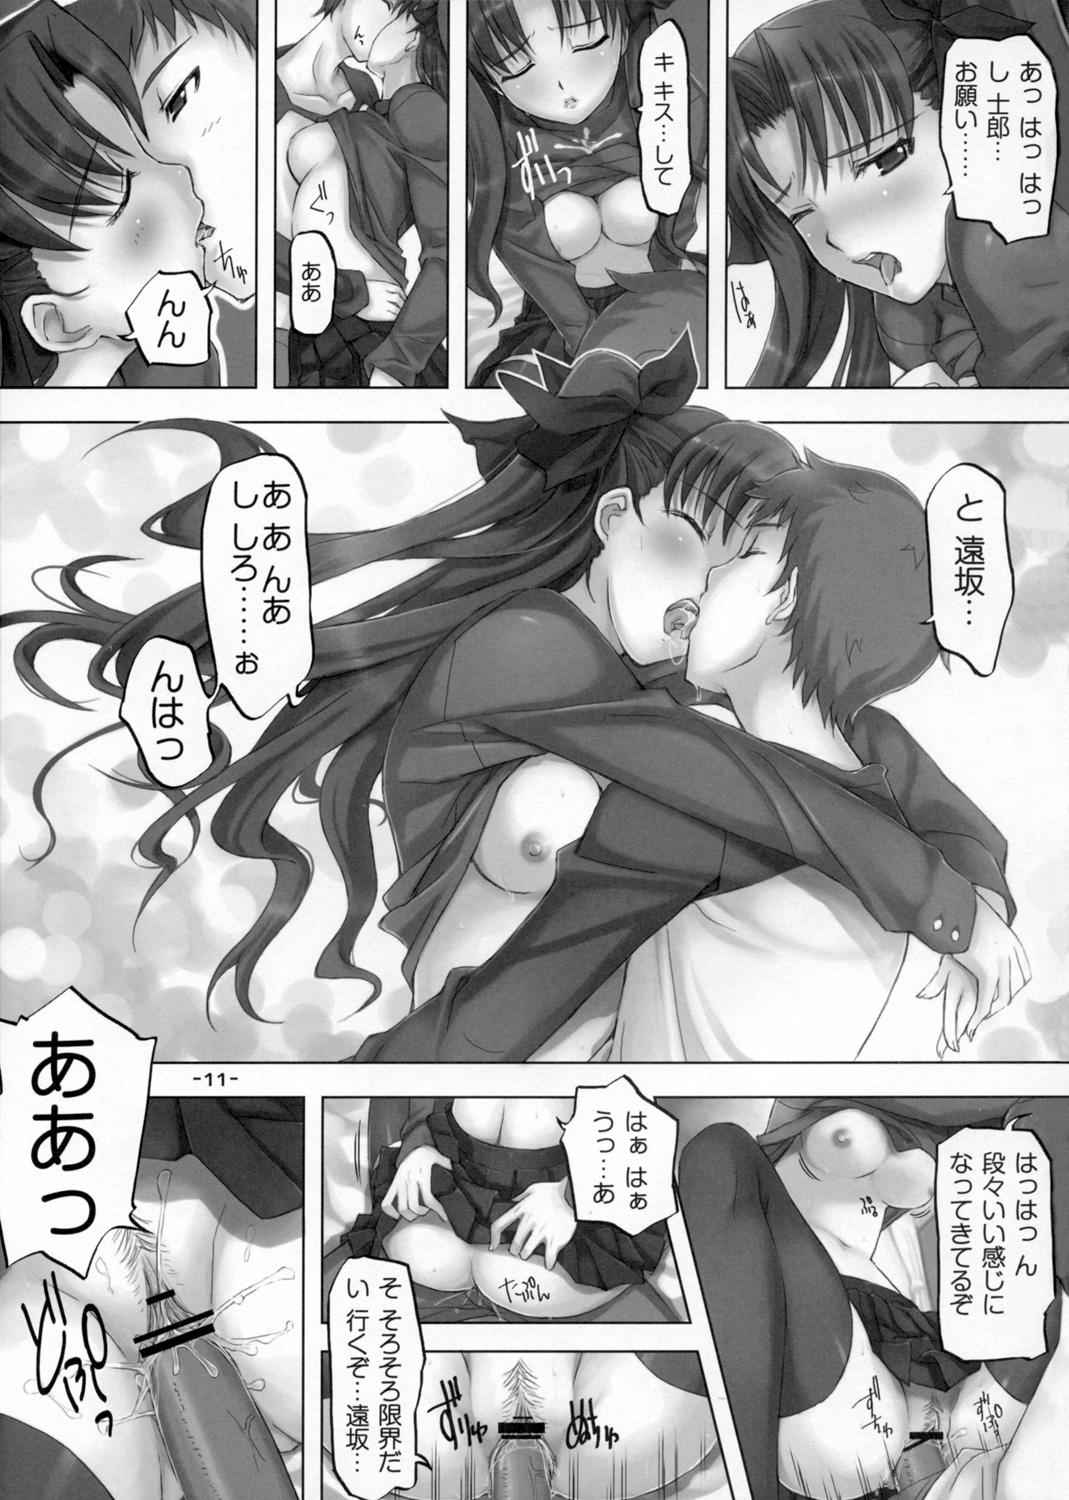 Shaved DAILY LIFE - Fate stay night Fate hollow ataraxia Amatures Gone Wild - Page 10